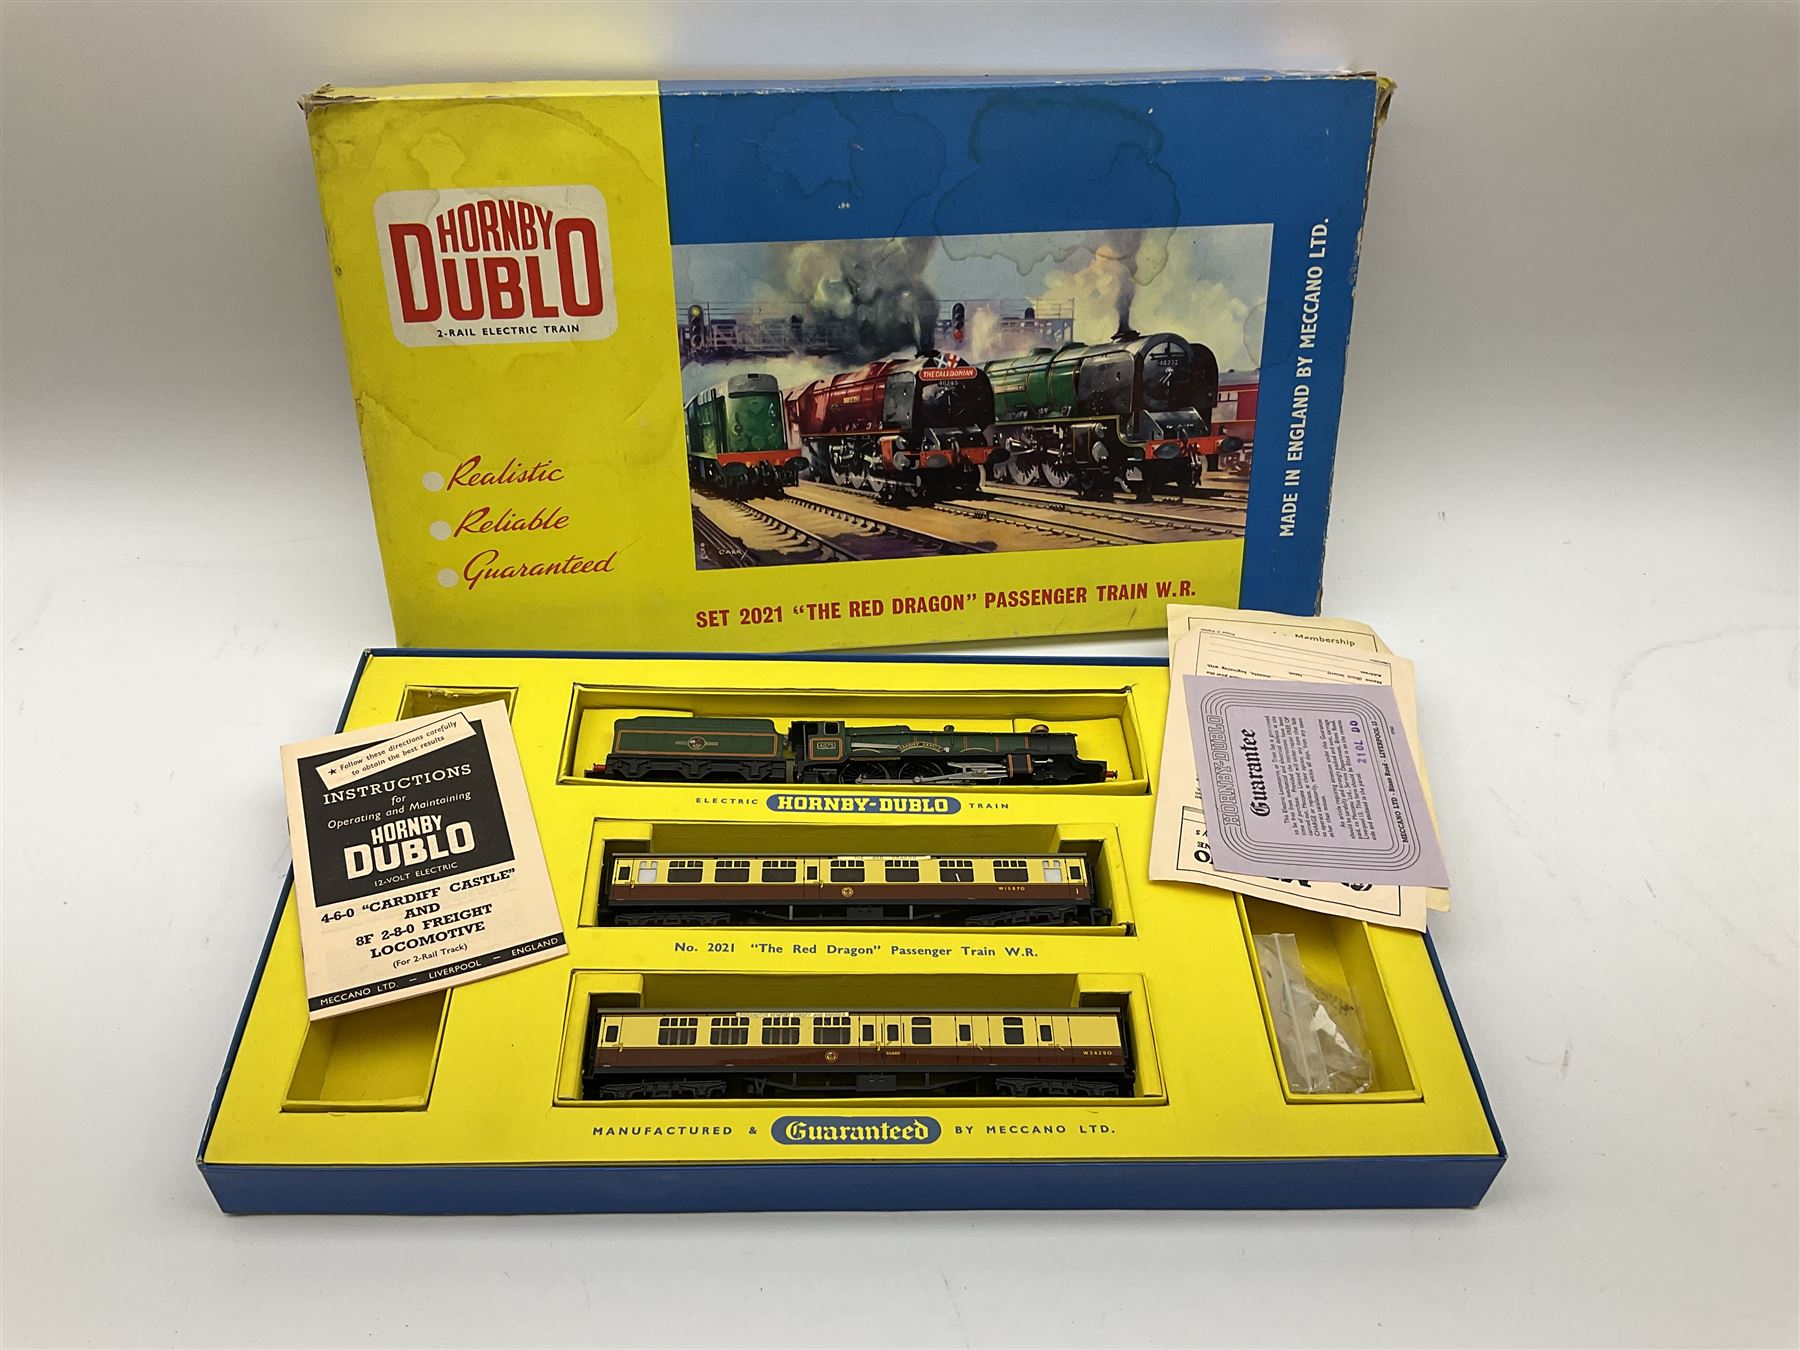 Hornby Dublo - two-rail set 2021 'The Red Dragon ' passenger train W.R. with Castle Class 4-6-0 loco - Image 2 of 3